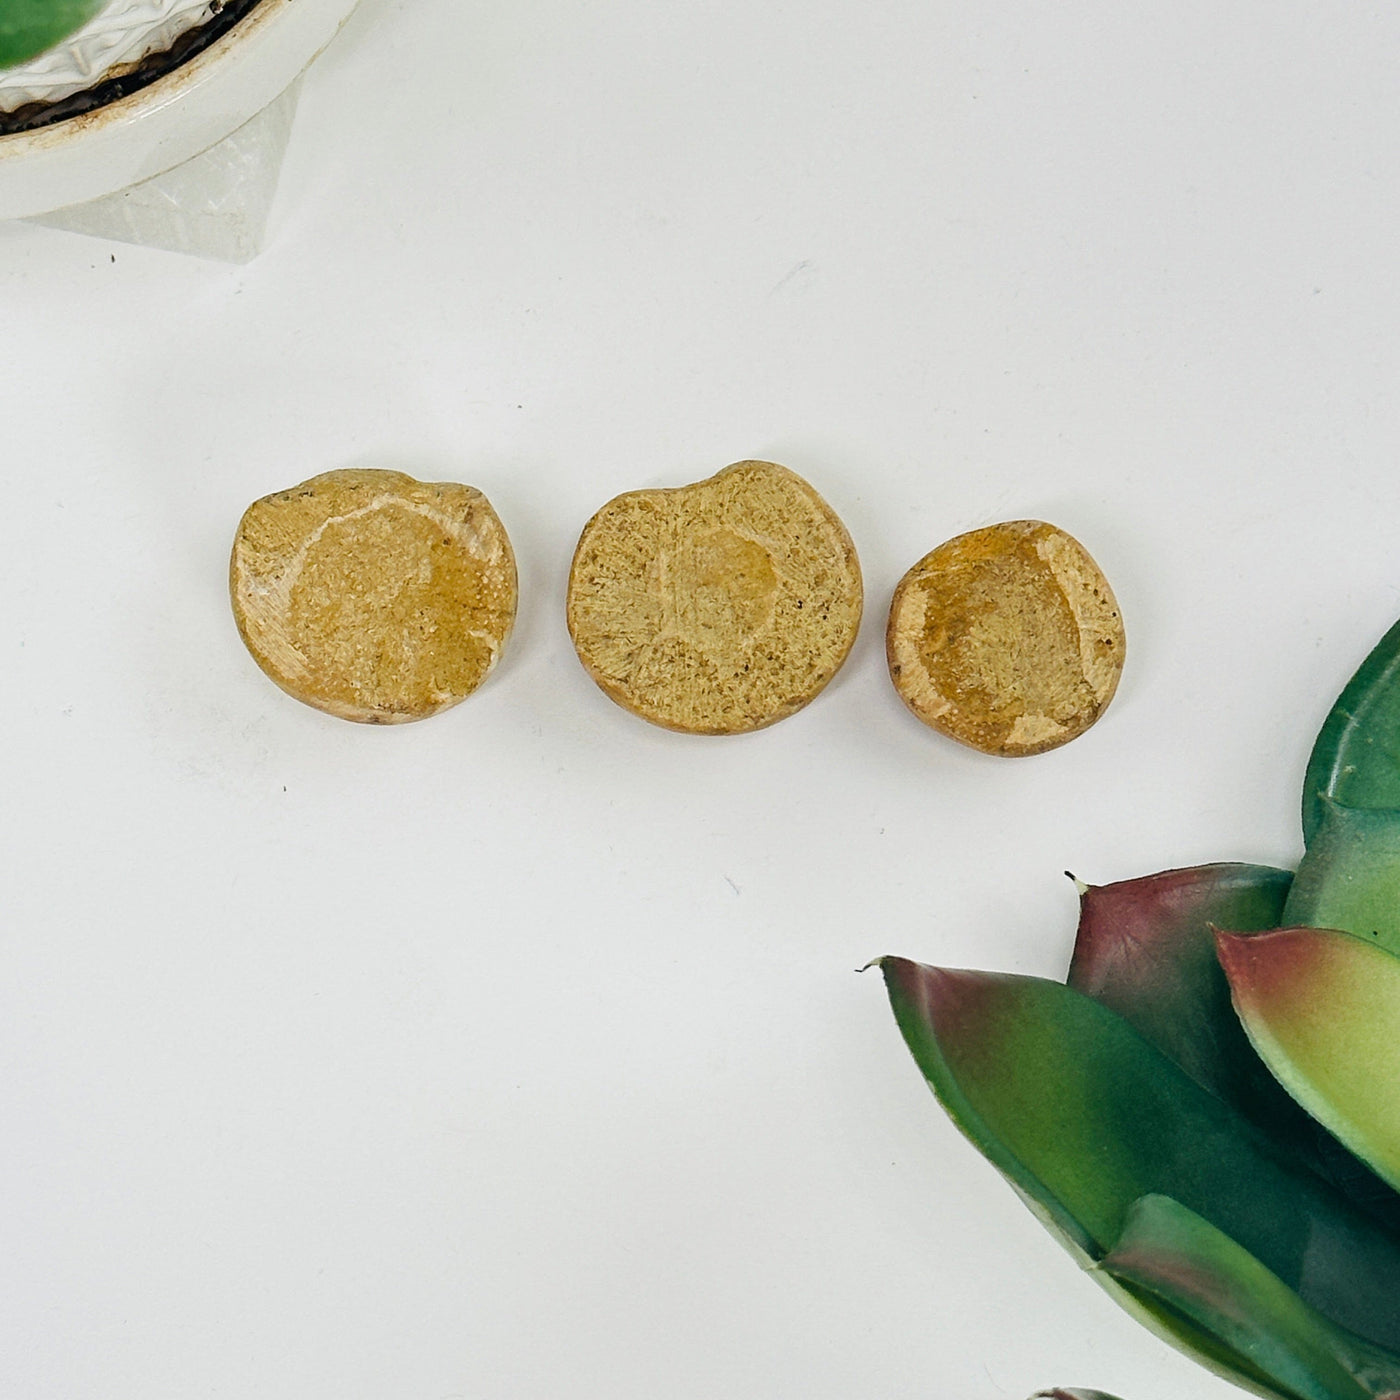 3 sand dollar fossils with decorations in the background